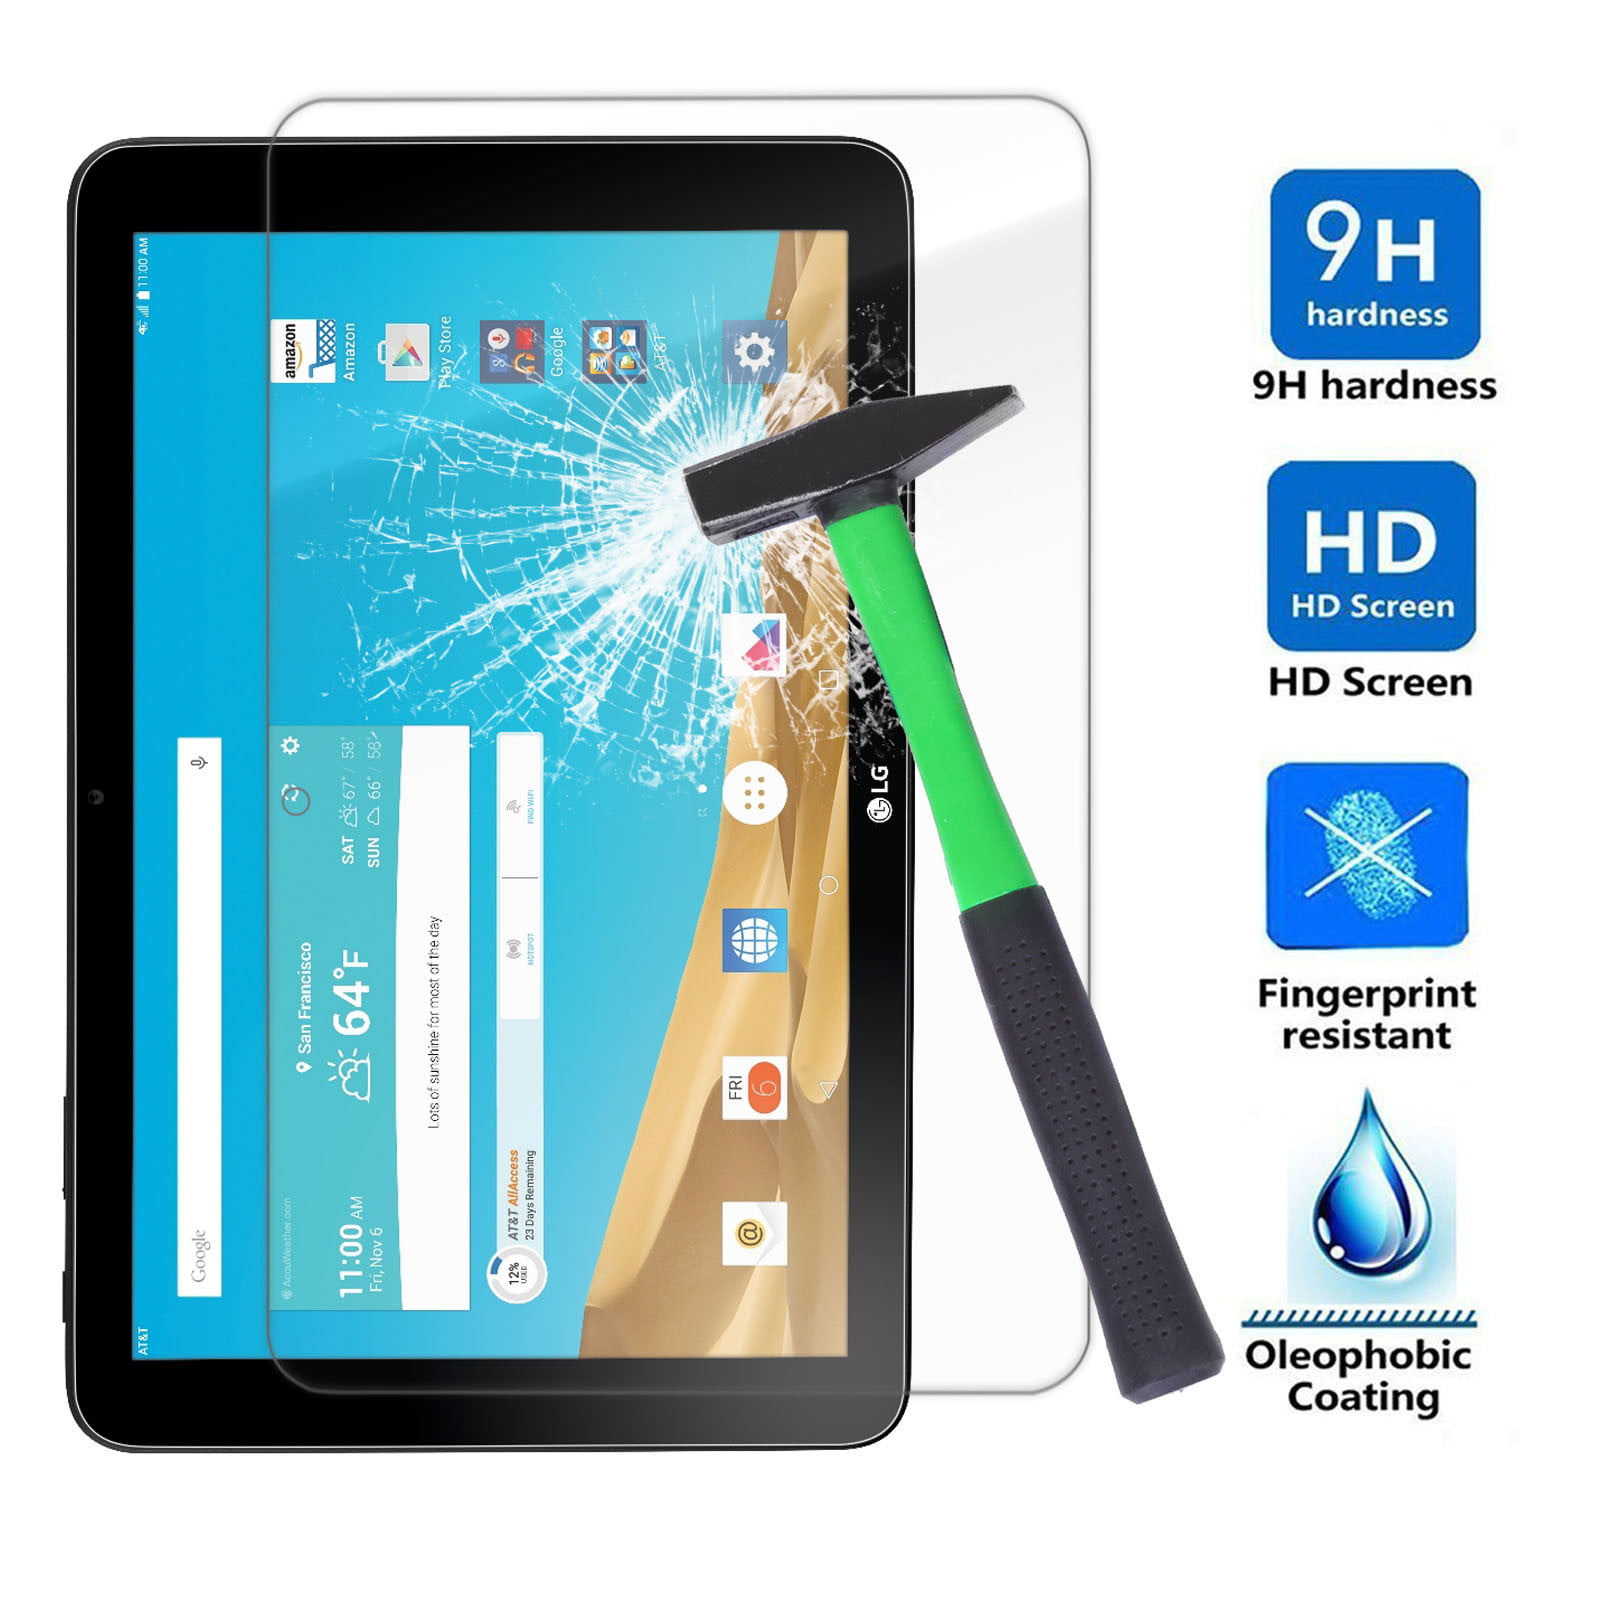 Tempered Glass Screen Protector Film For LG G Pad 2 10.1/G Pad X 10.1 inch V930 